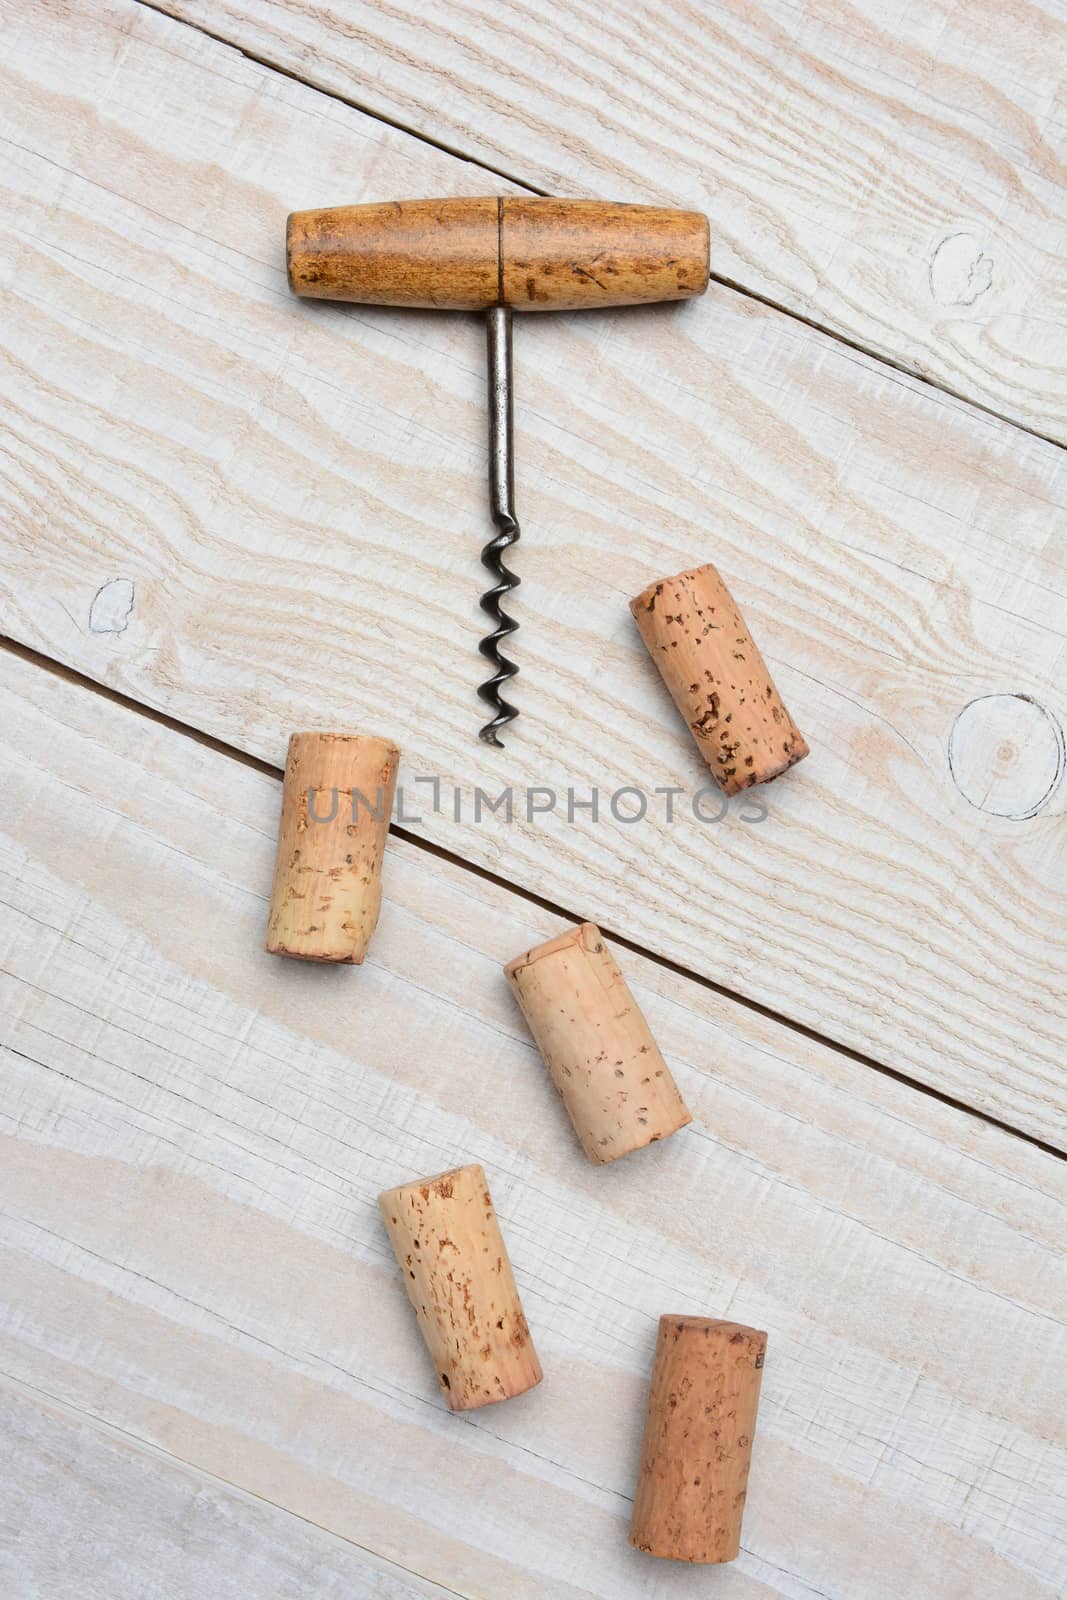 Closeup of an antique cork screw and five used corks on a rustic whitewashed wood table. Vertical format from a high angle.